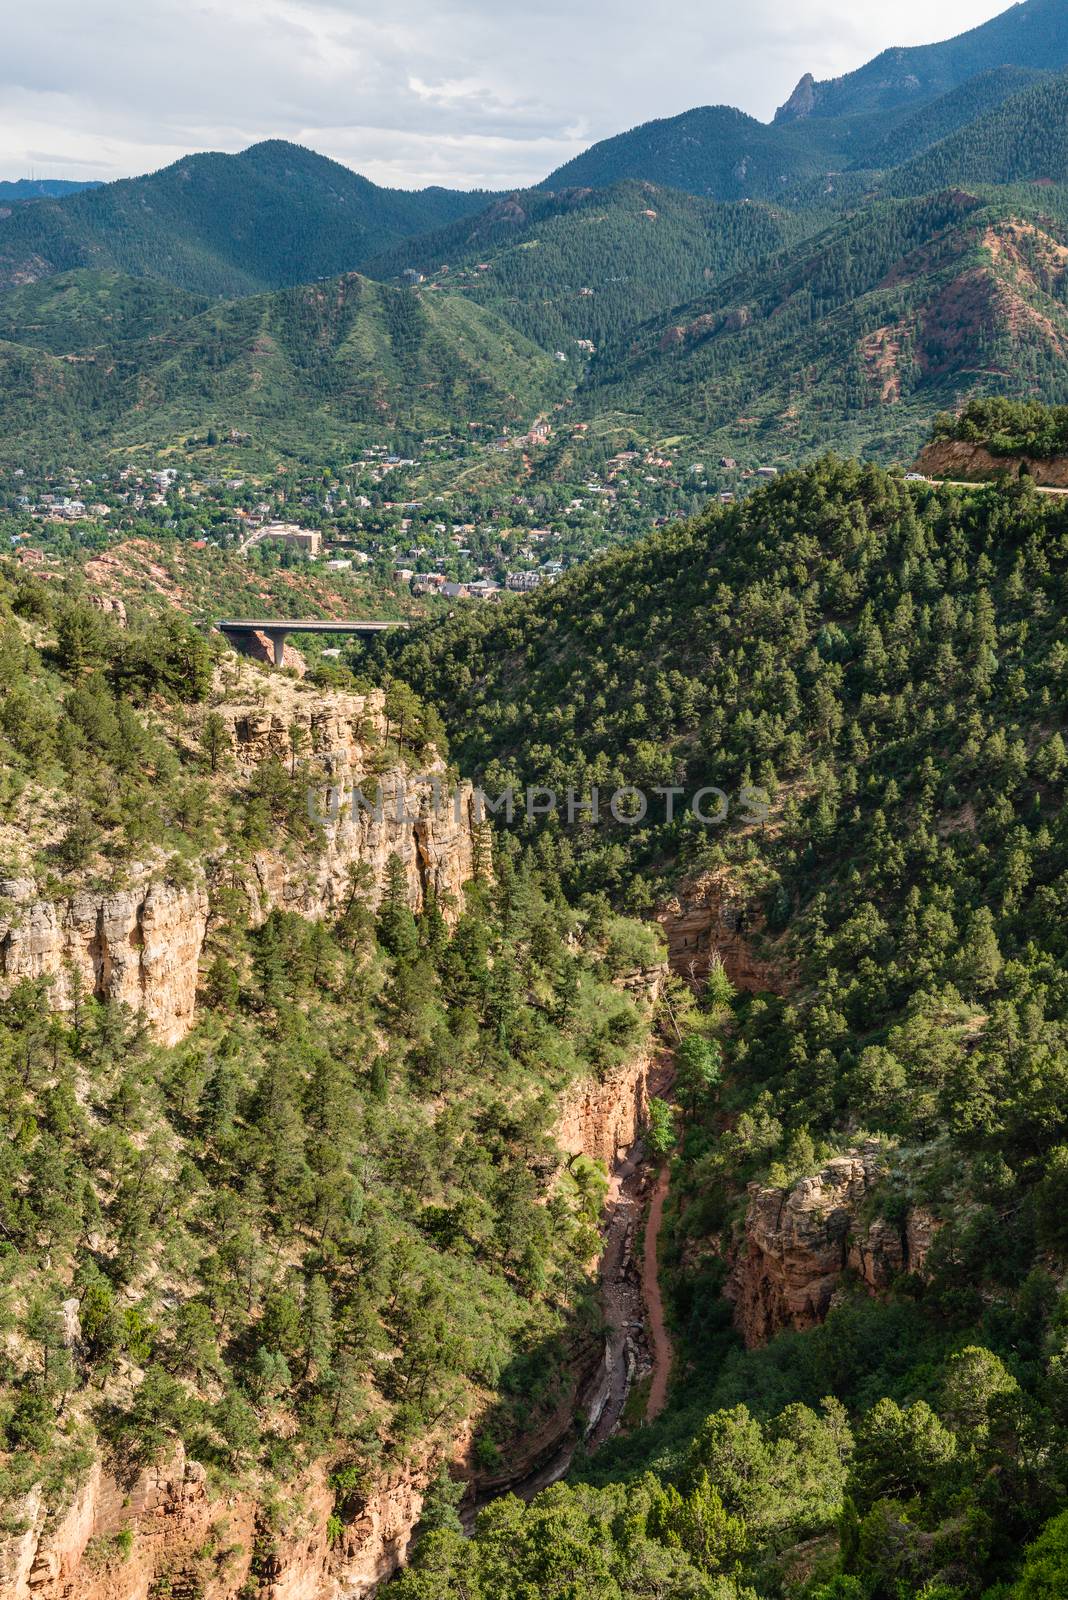 View of Williams Canyon from Cave of the Winds in Manitou Springs, Colorado by Njean